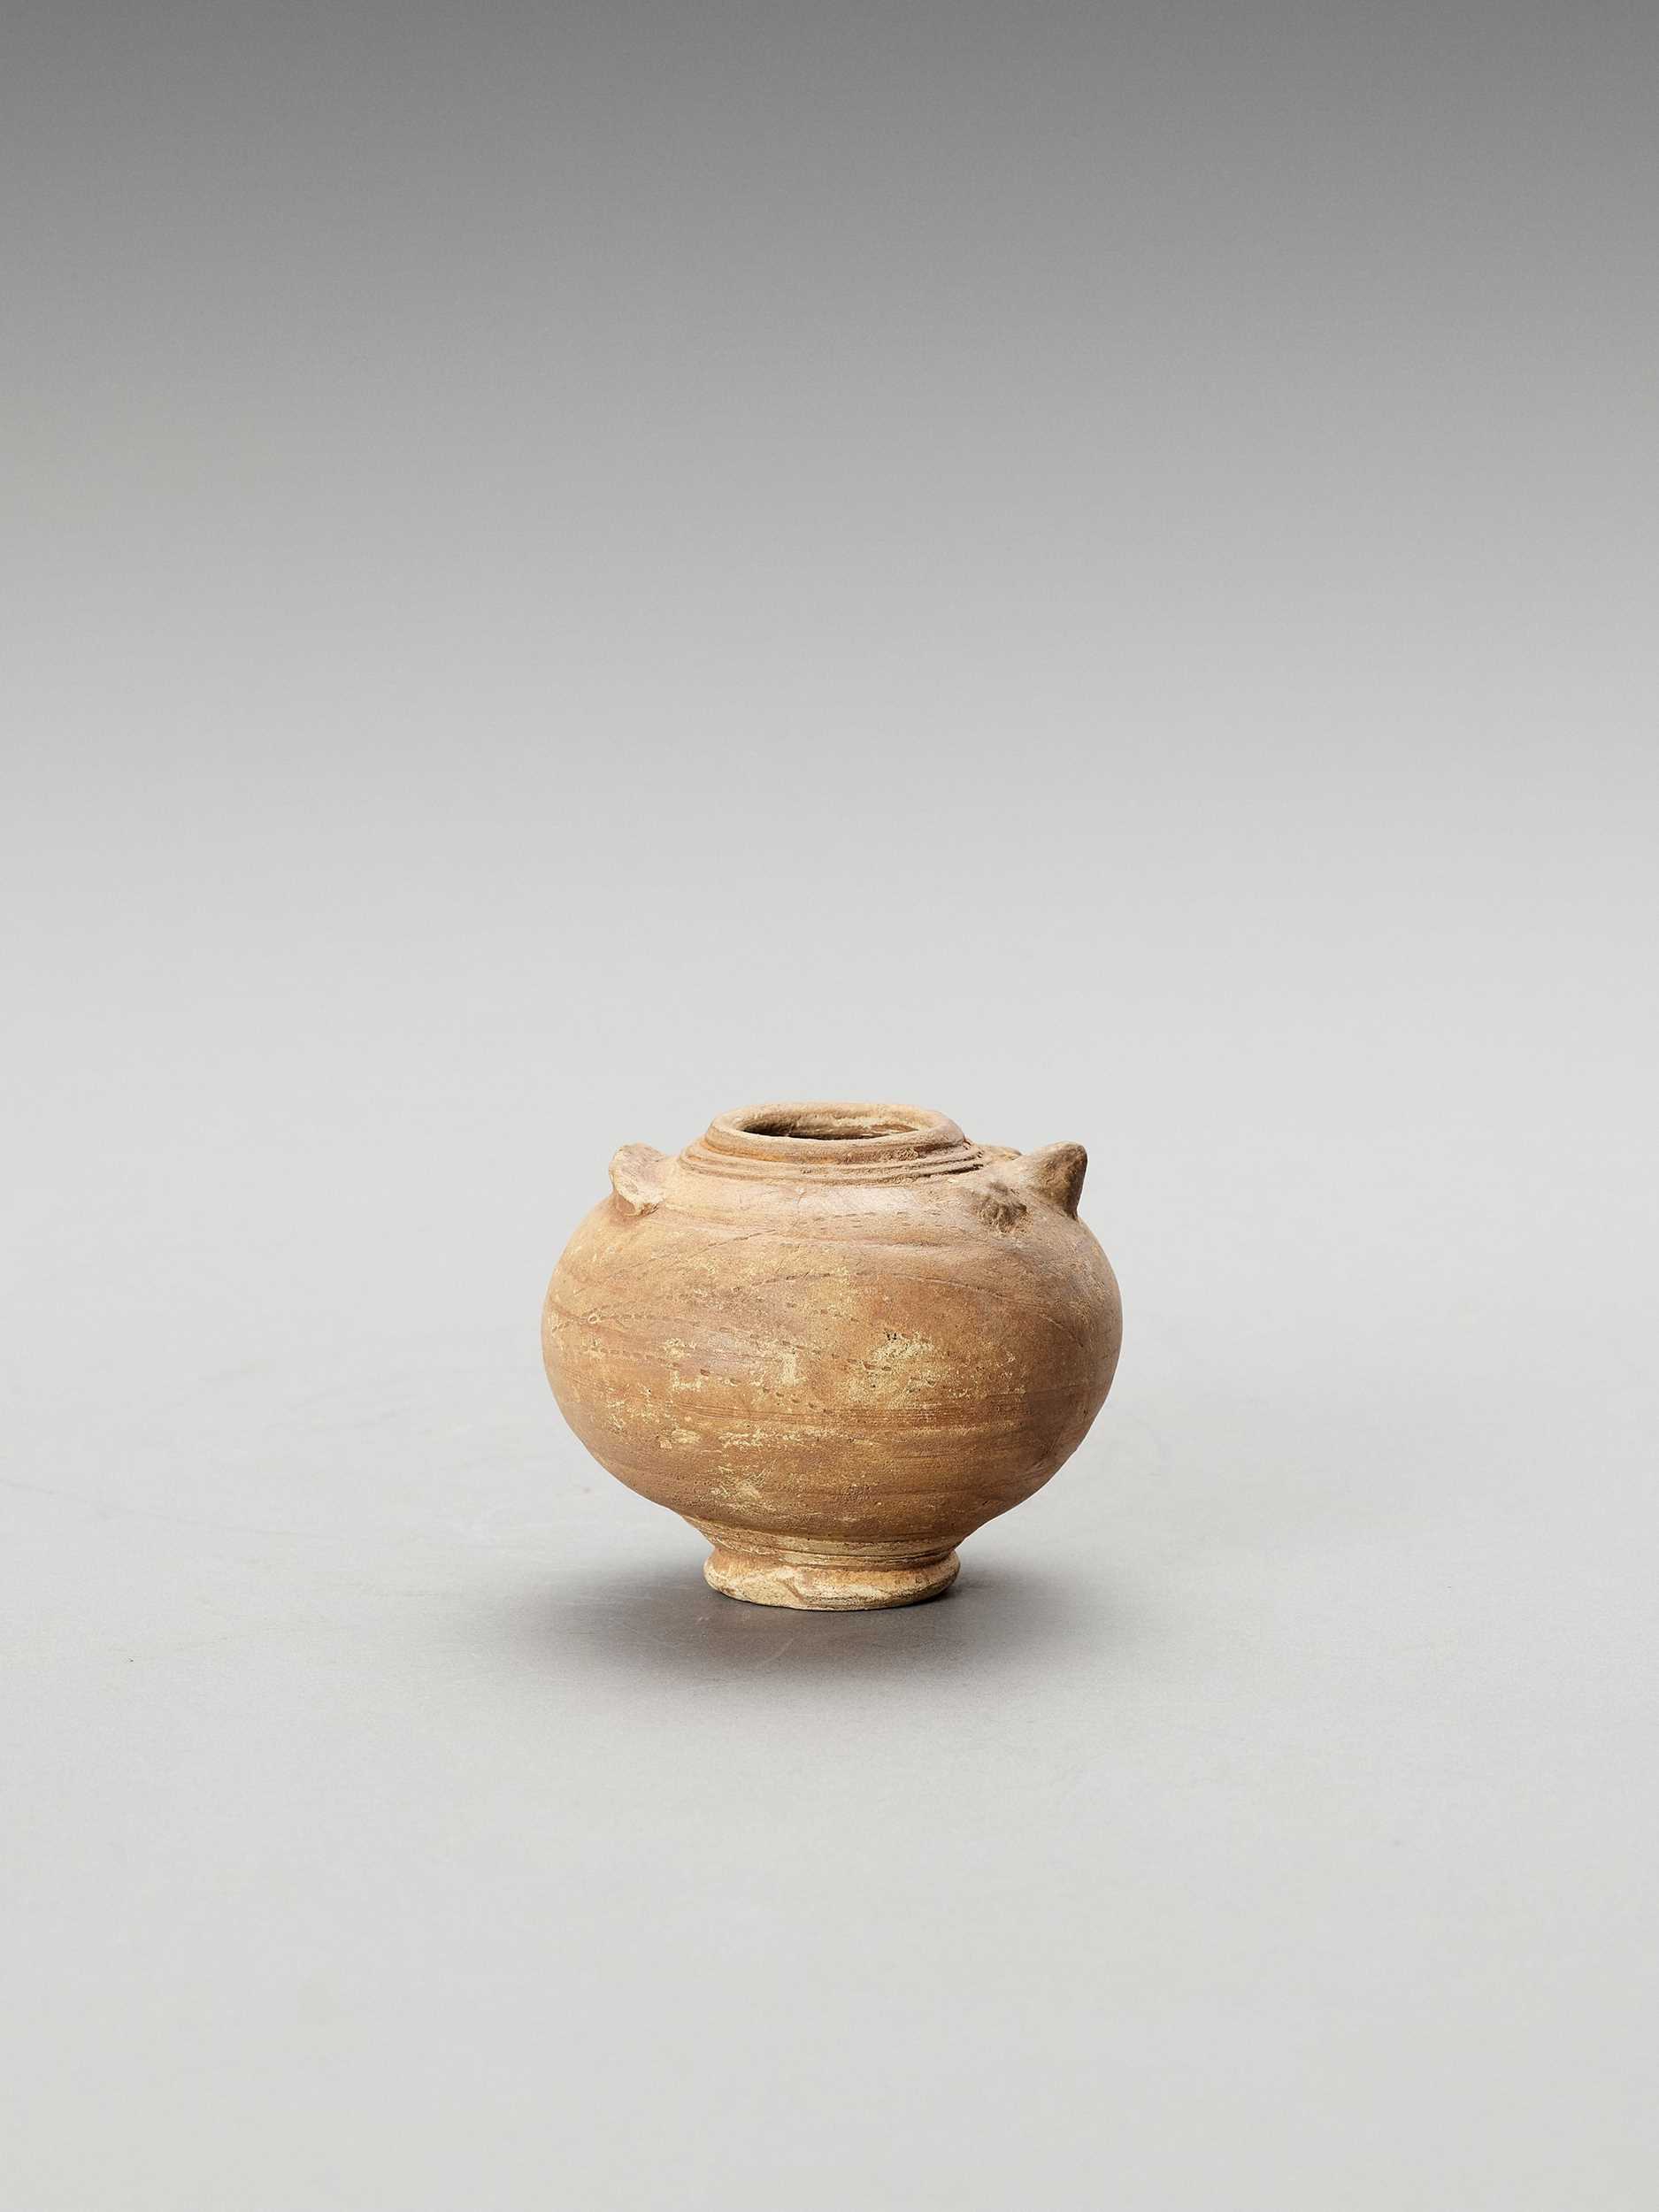 Lot 1172 - A SMALL CERAMIC VASE IN THE FORM OF AN OWL